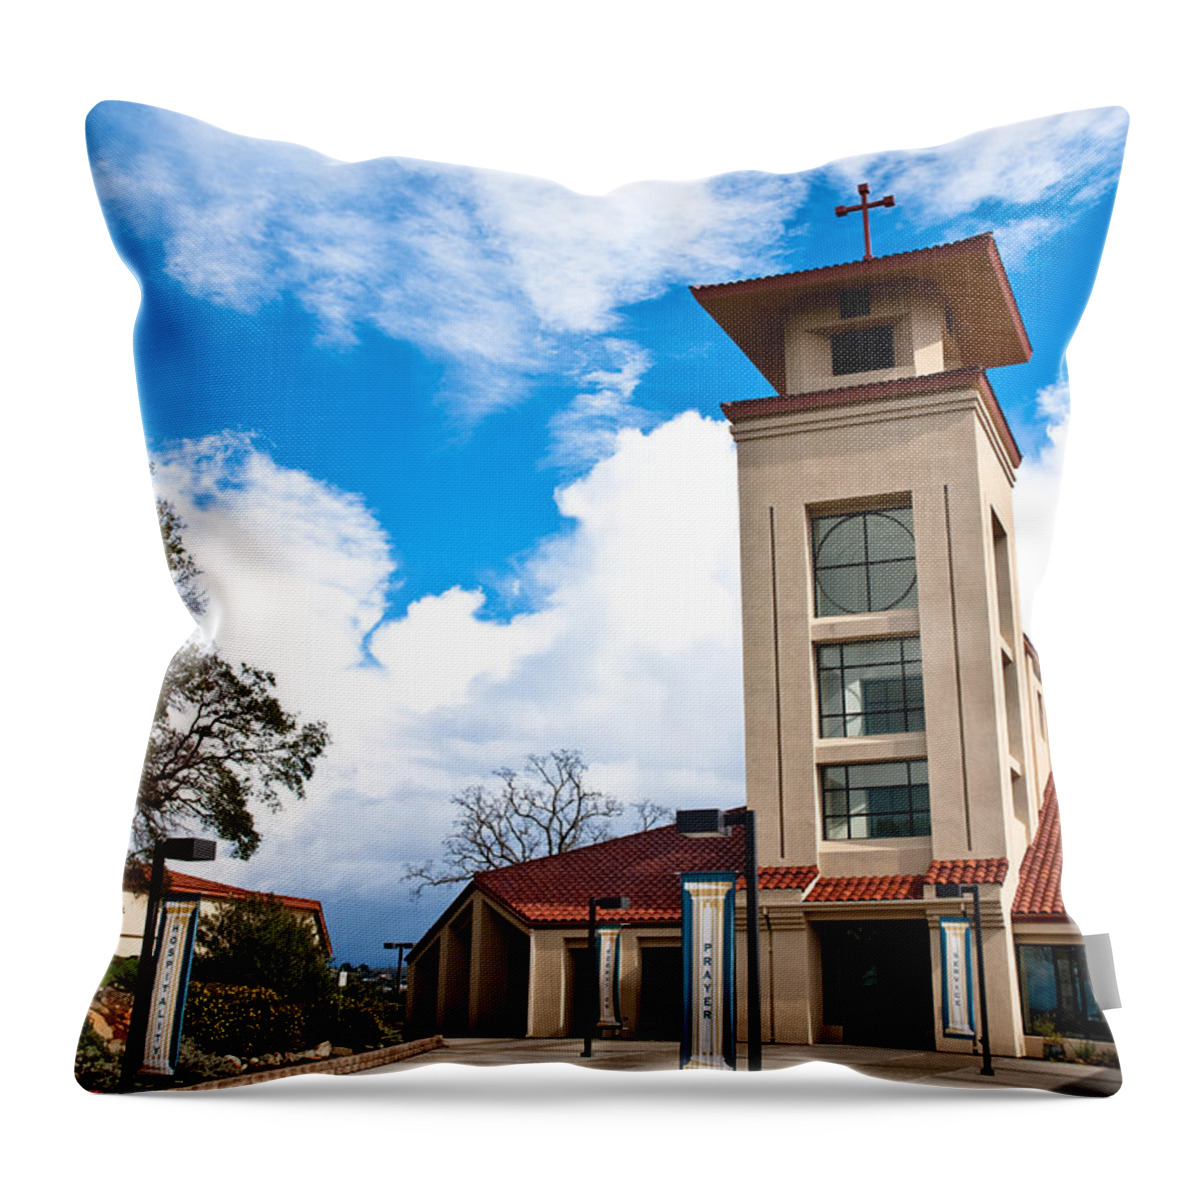 Holy Throw Pillow featuring the photograph Holy Trinity Church by Shane Kelly